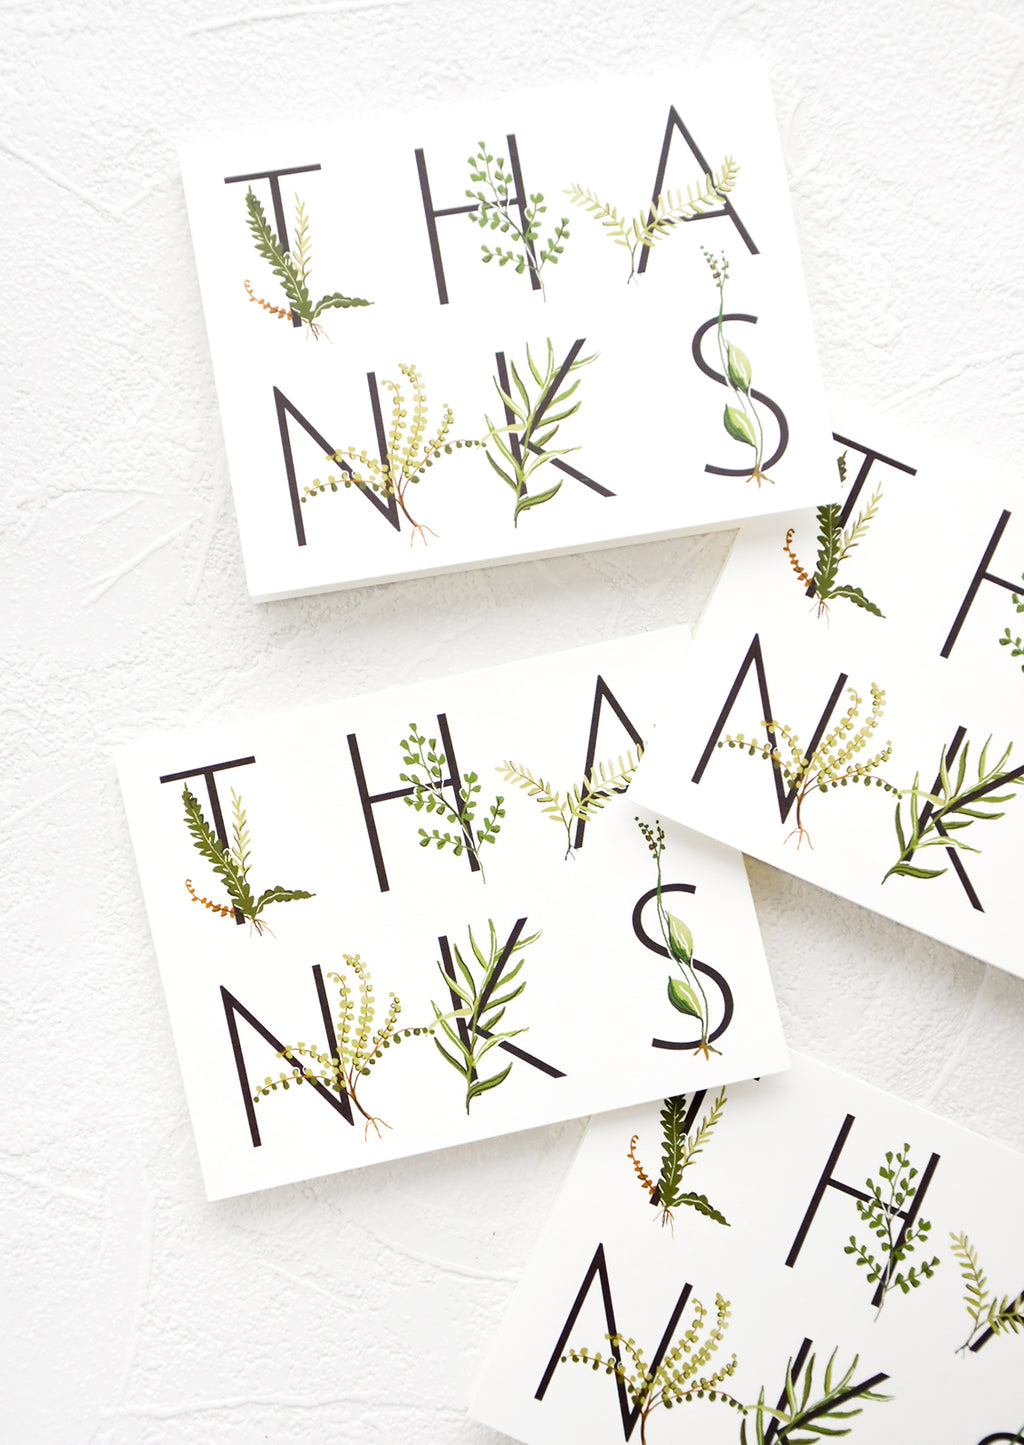 1: Multiple greeting cards in same design, spelling "THANKS" in capital letters wrapped with greenery